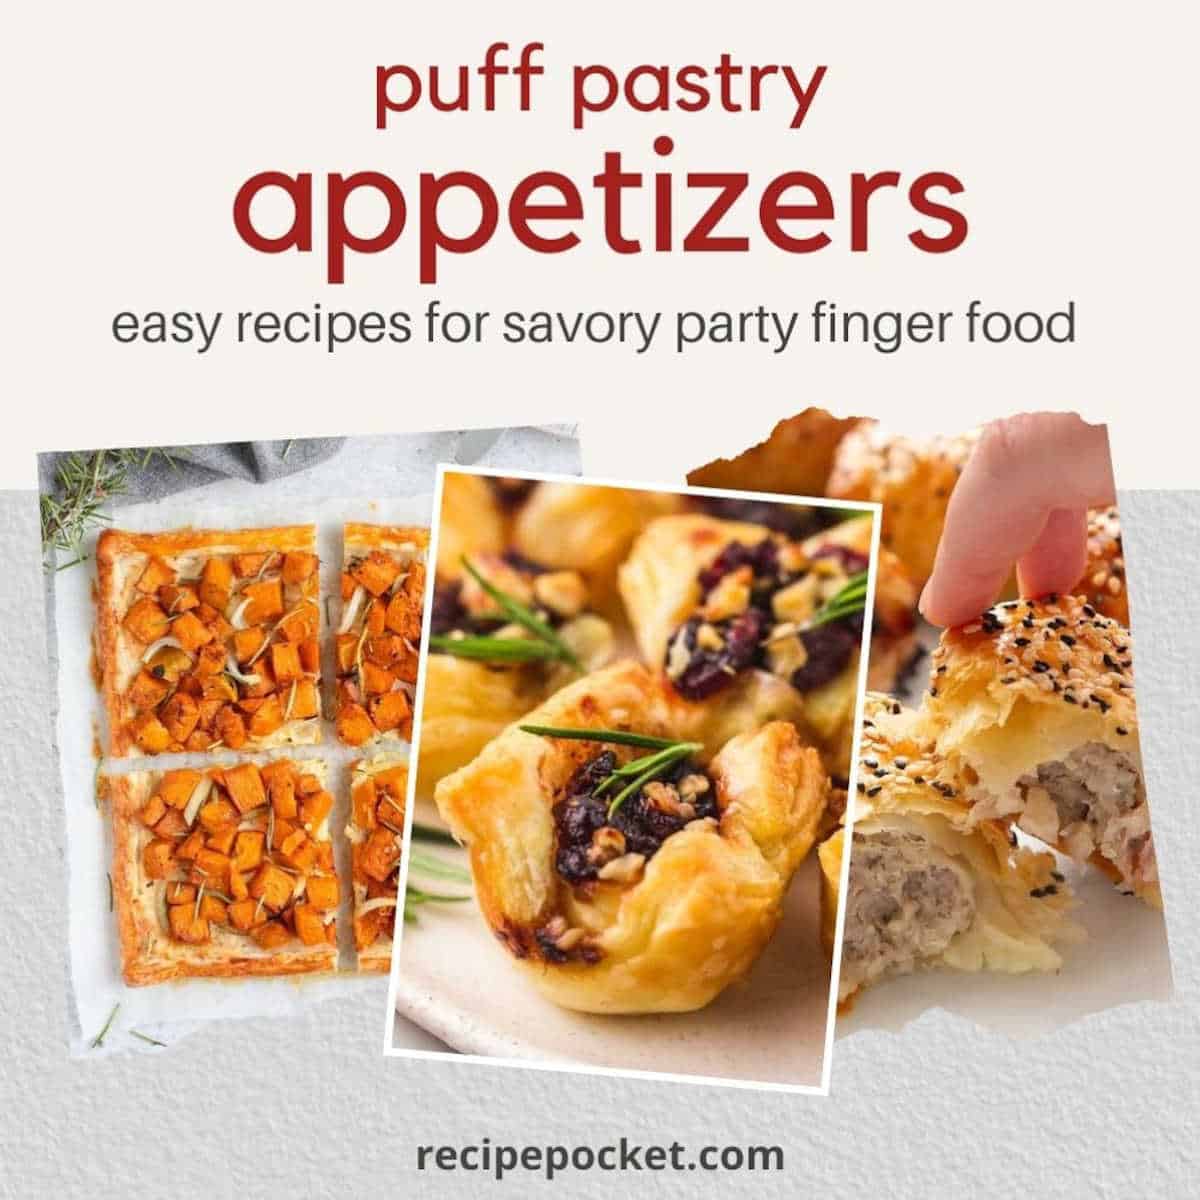 Mini Pizzas appetizers quick and easy to prepare using puff pastry